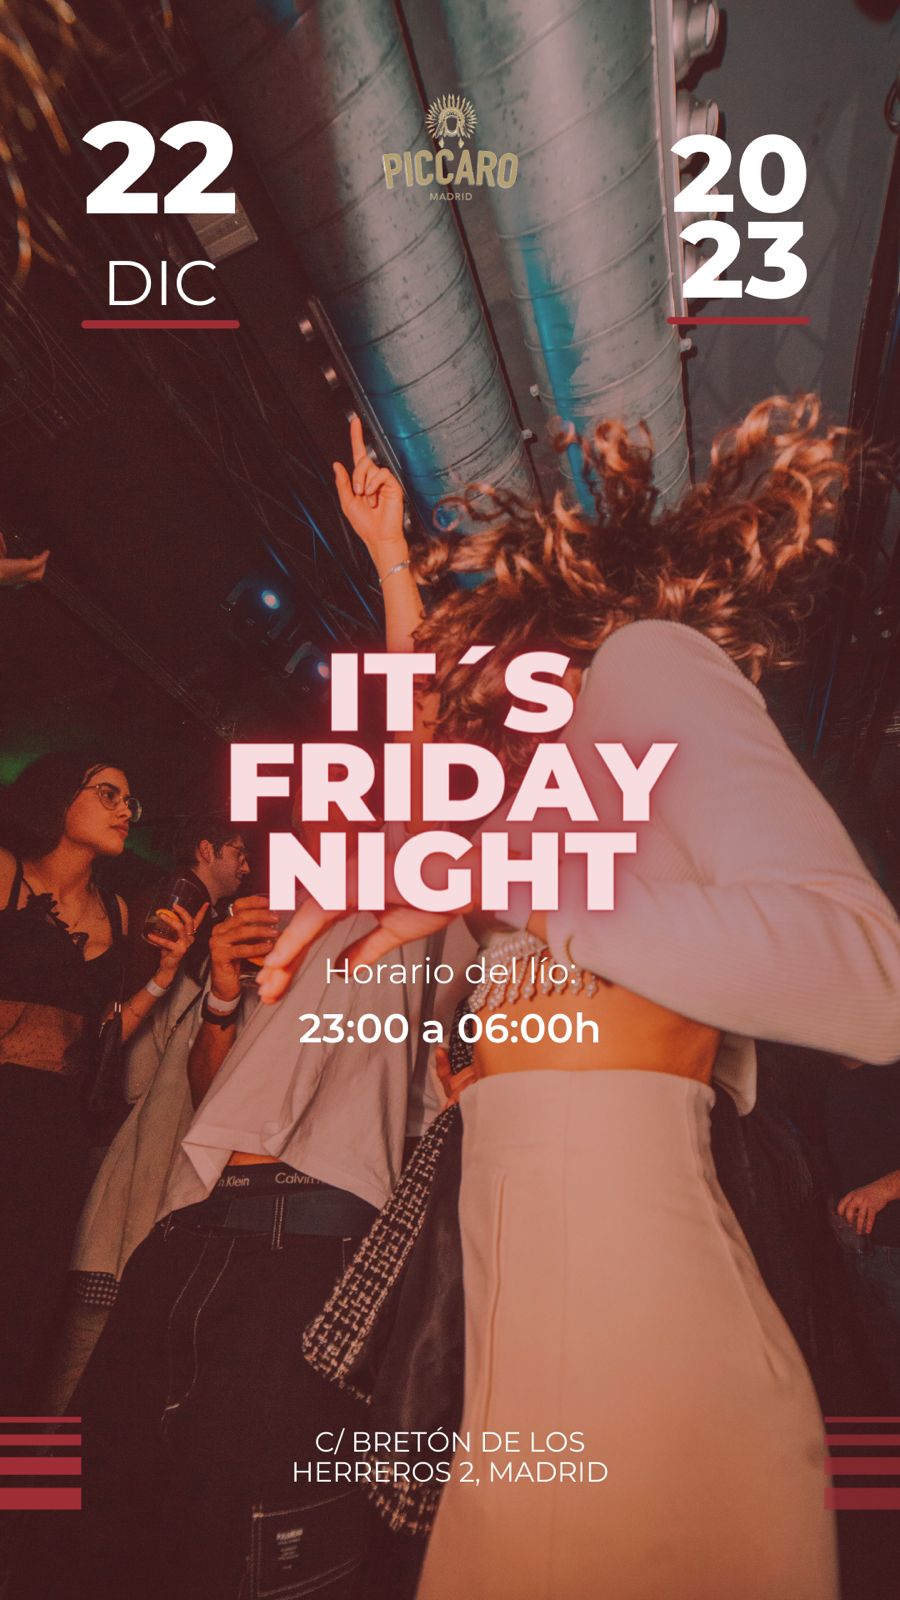 Viernes - It´s Friday Night at Piccaro, Events, Tickets & Vip Zones